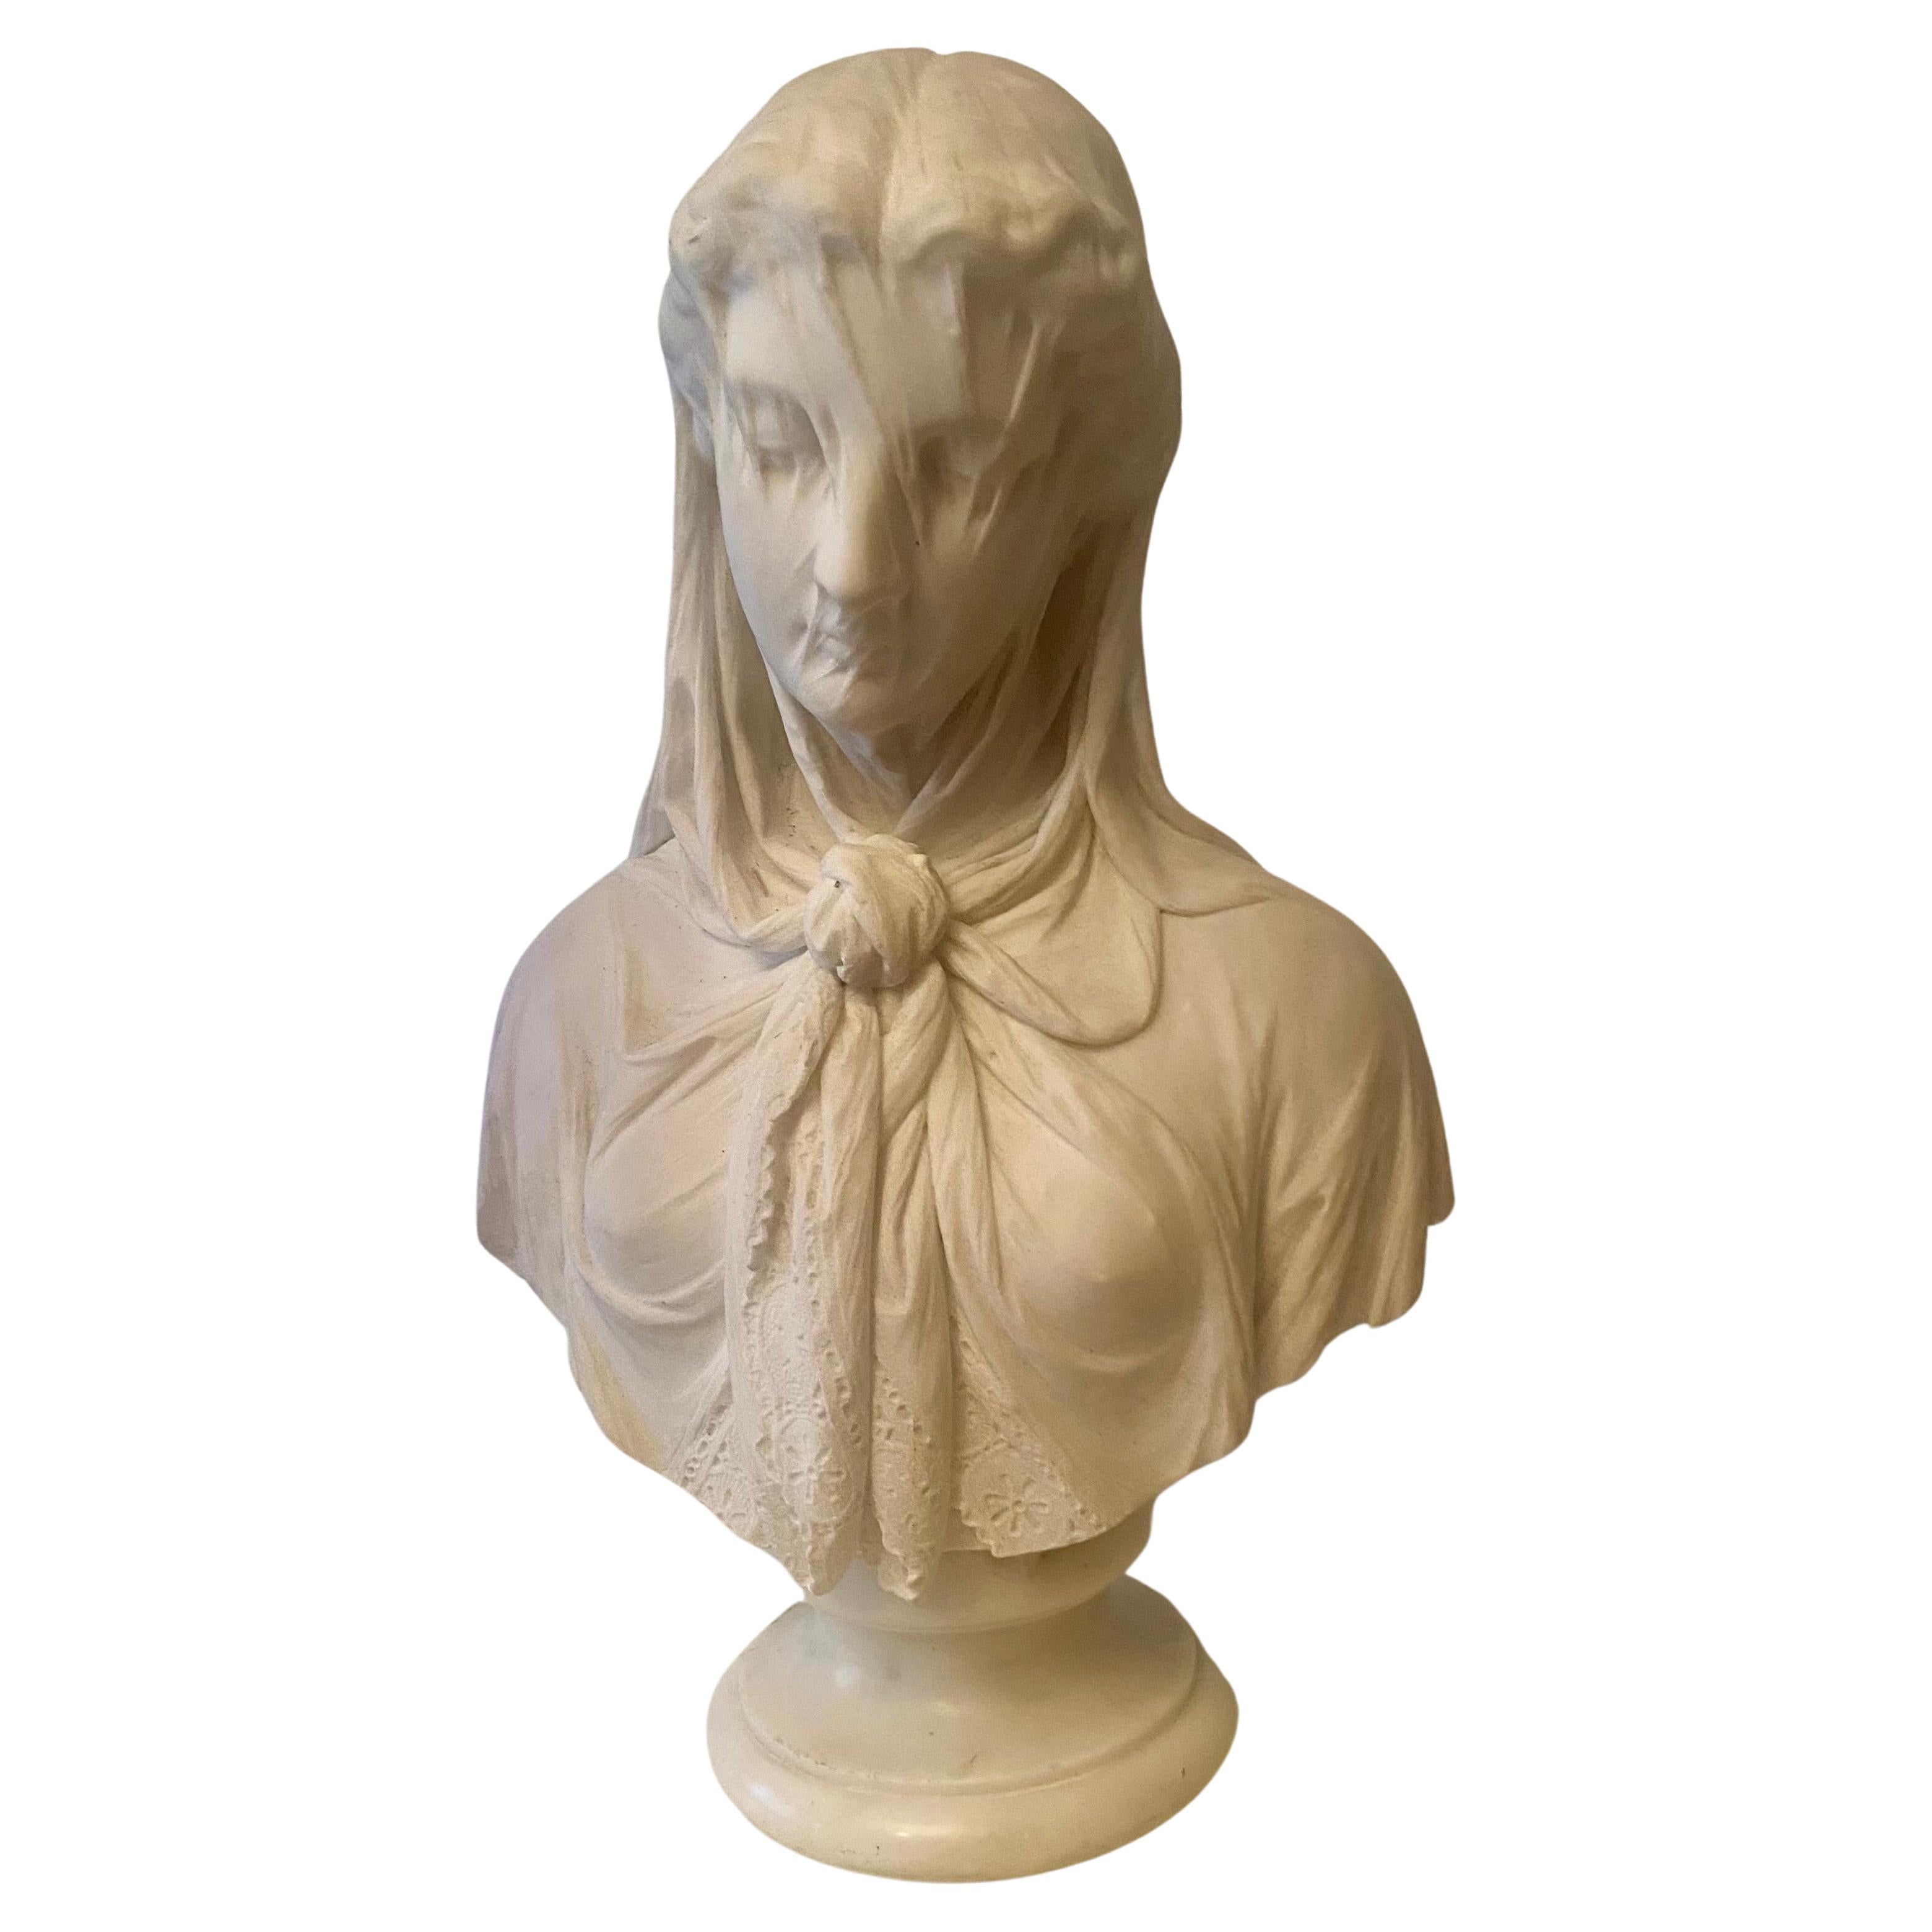 This is a high quality solid marble bust, though one of a kind, is particularly finely composed and delicately carved. Although she does not wear a wreath of flowers, this young woman, with the modest tilt of her head and the veil with its elaborate